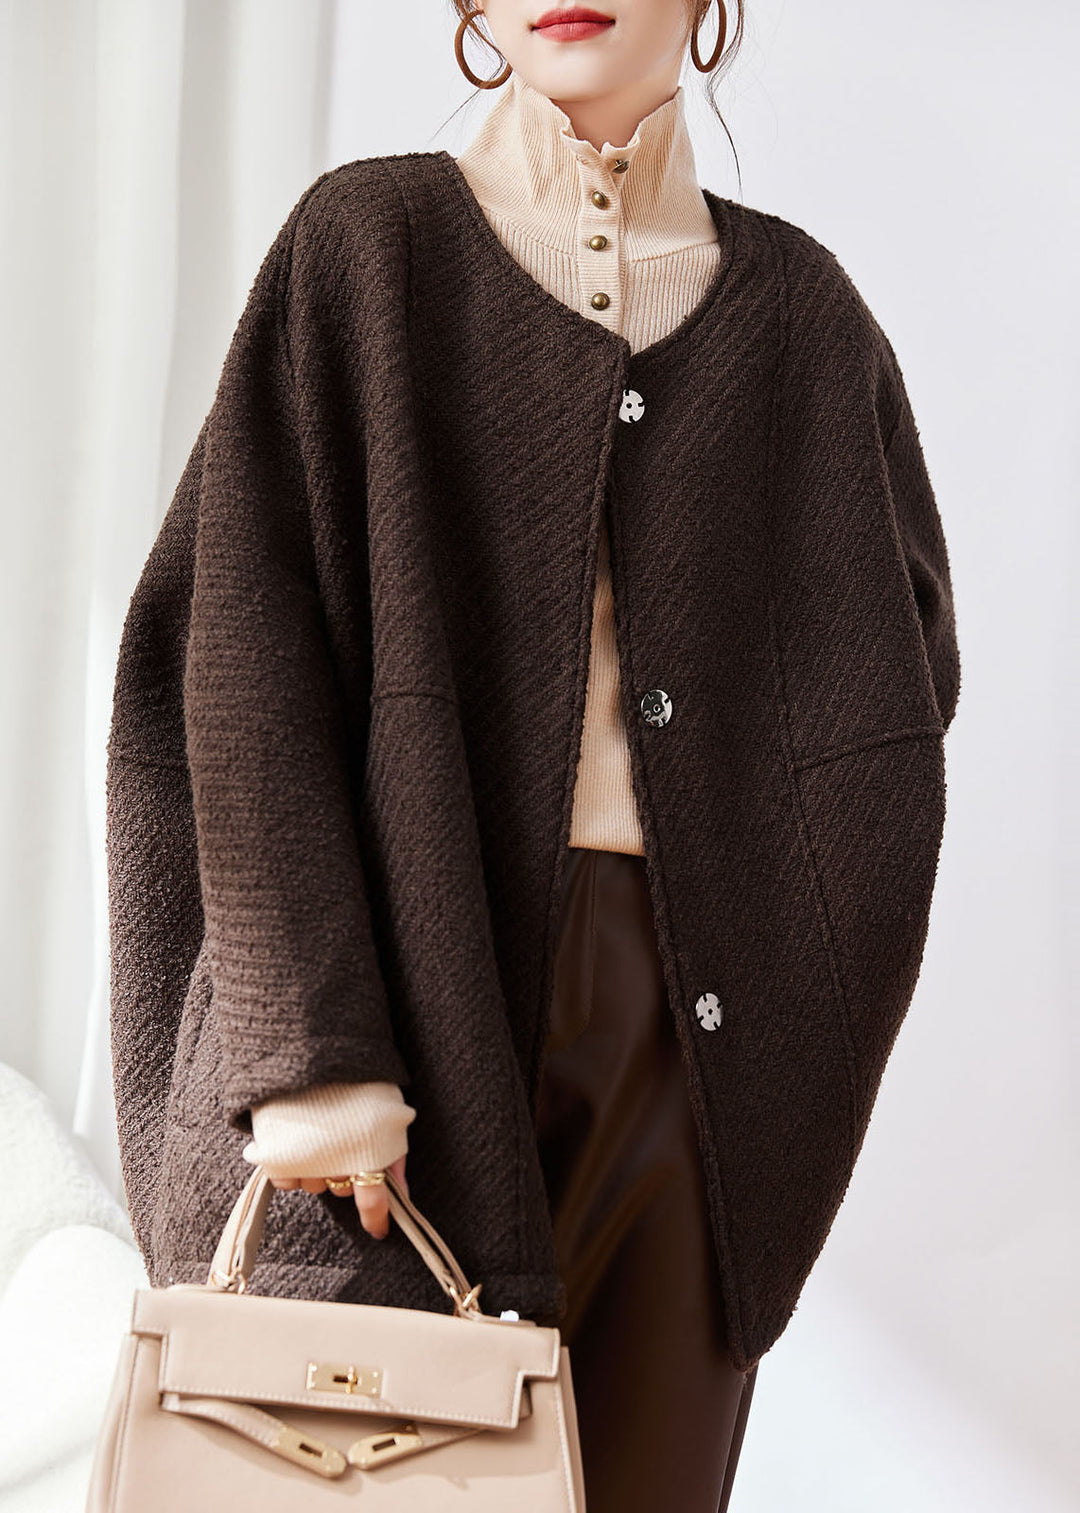 Plus Size Coffee Button Patchwork Cozy Woolen Coat Fall